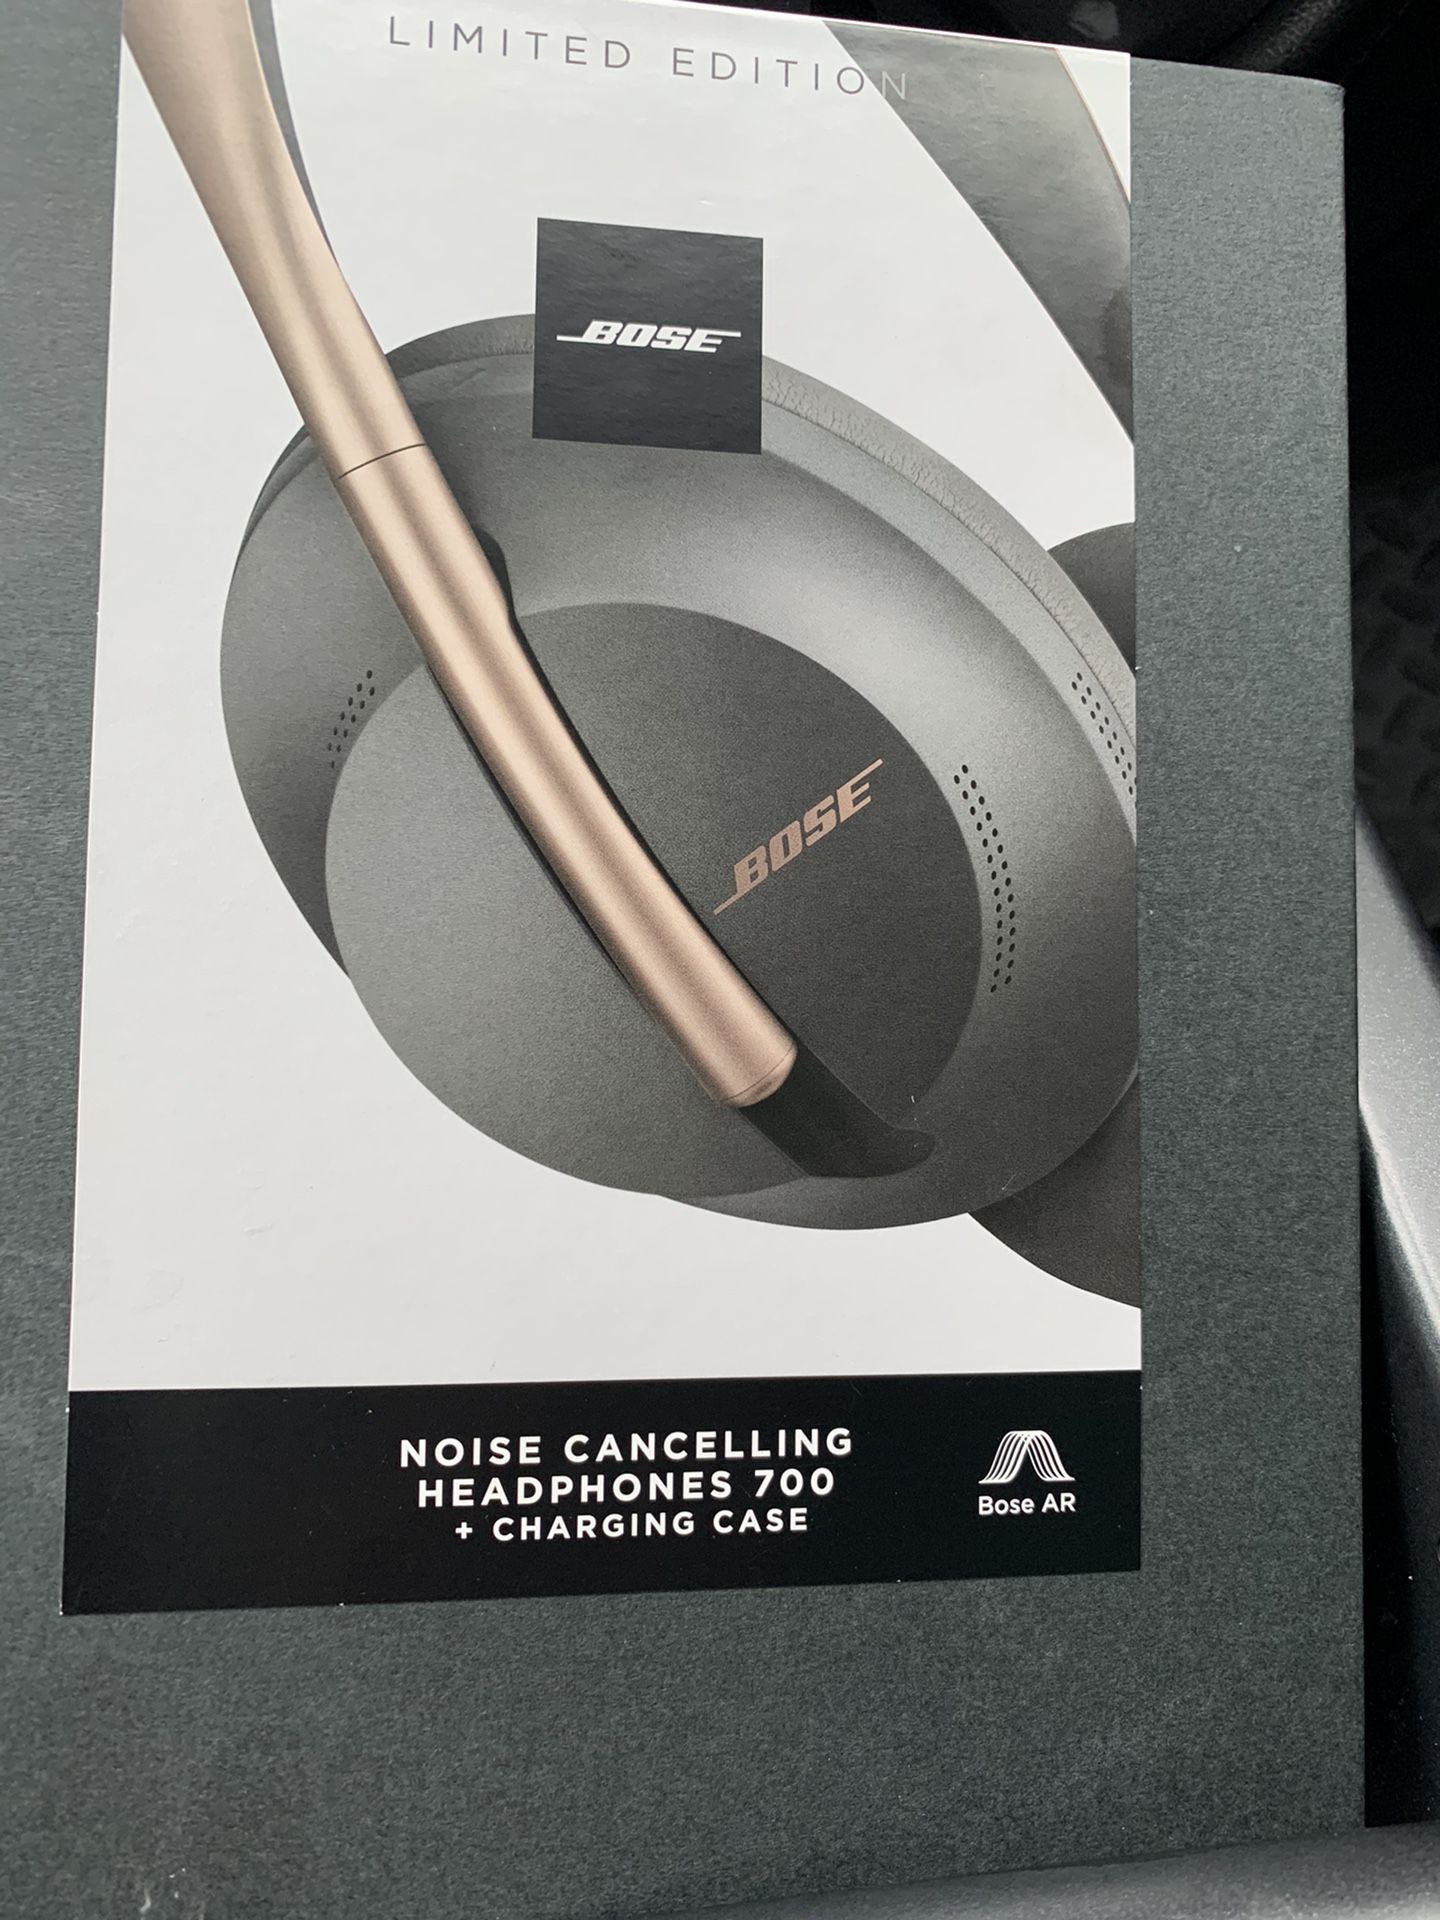 BOSE LIMITED EDITION